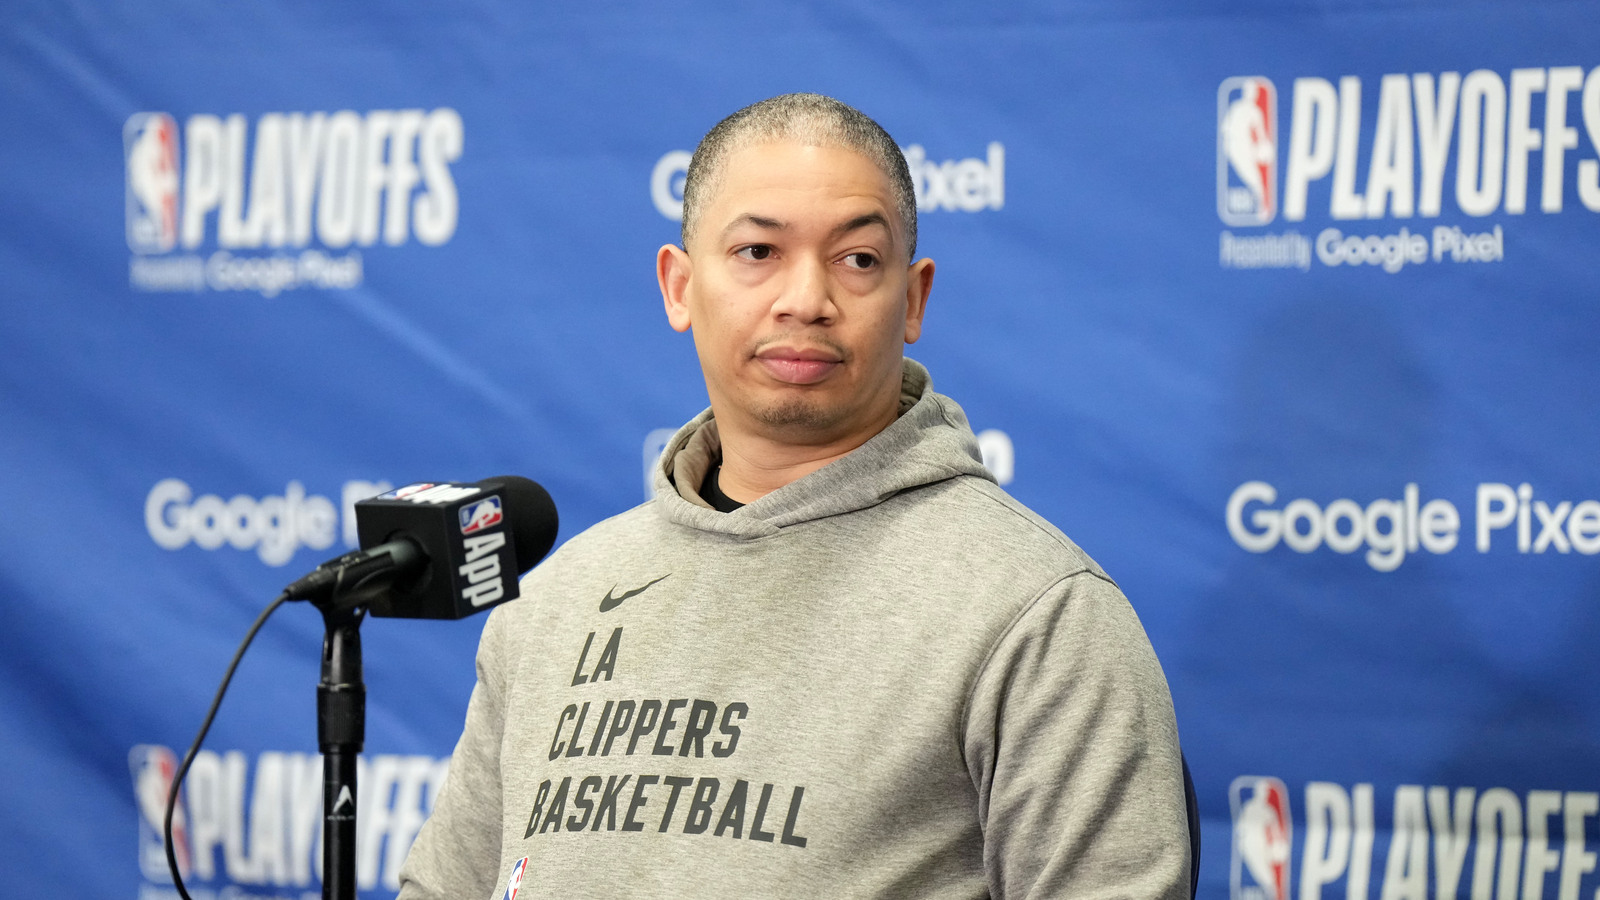 Los Angeles Lakers Reportedly Giving Up on Hiring Ty Lue or Jason Kidd as Head Coach – Here’s Why